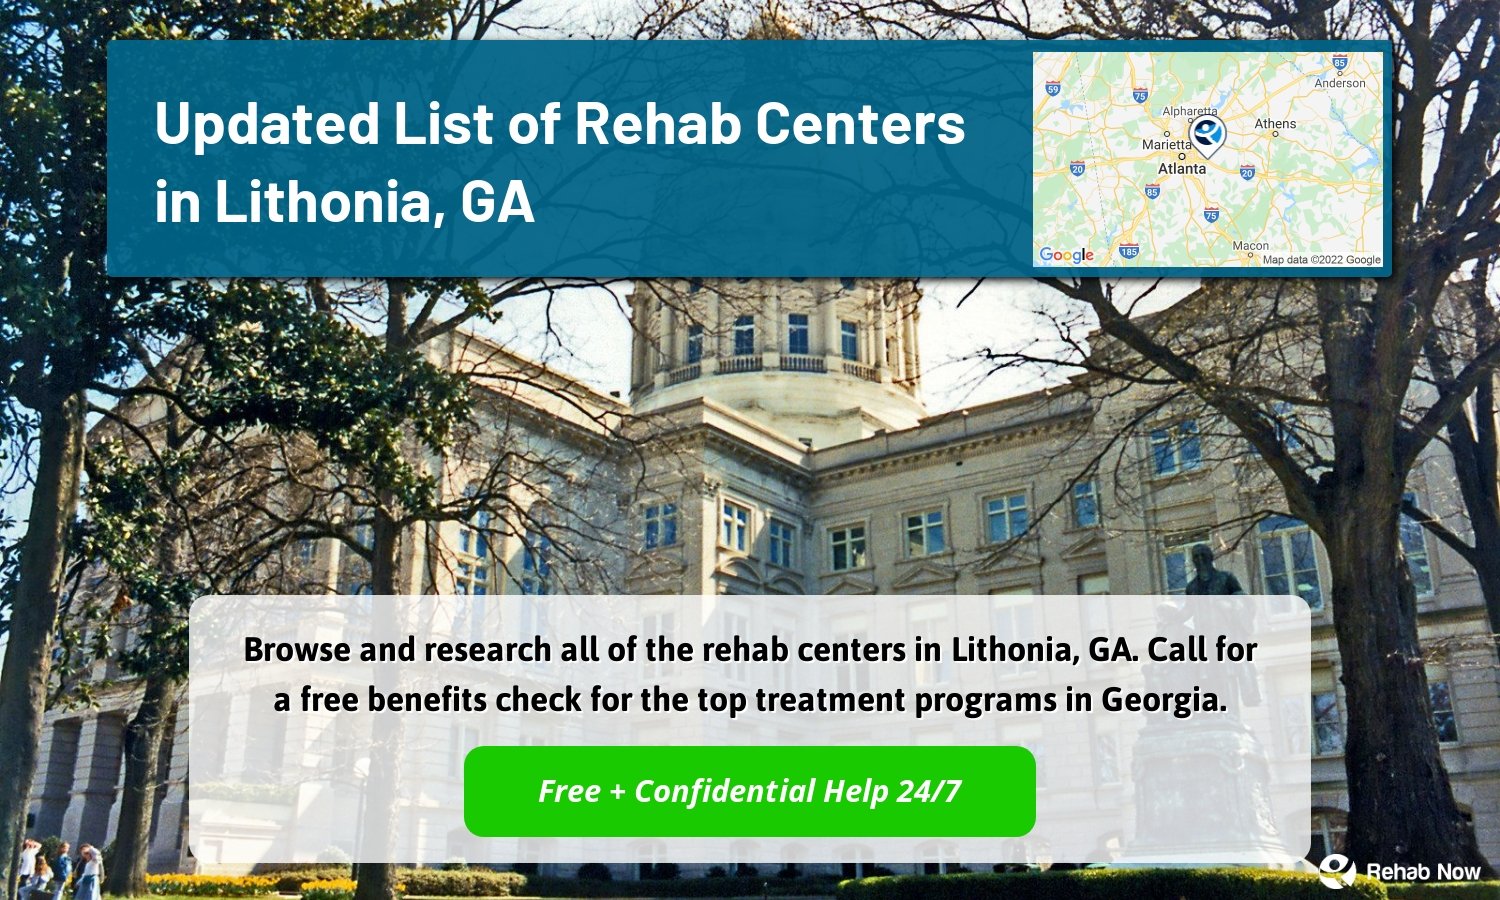 Browse and research all of the rehab centers in Lithonia, GA. Call for a free benefits check for the top treatment programs in Georgia.